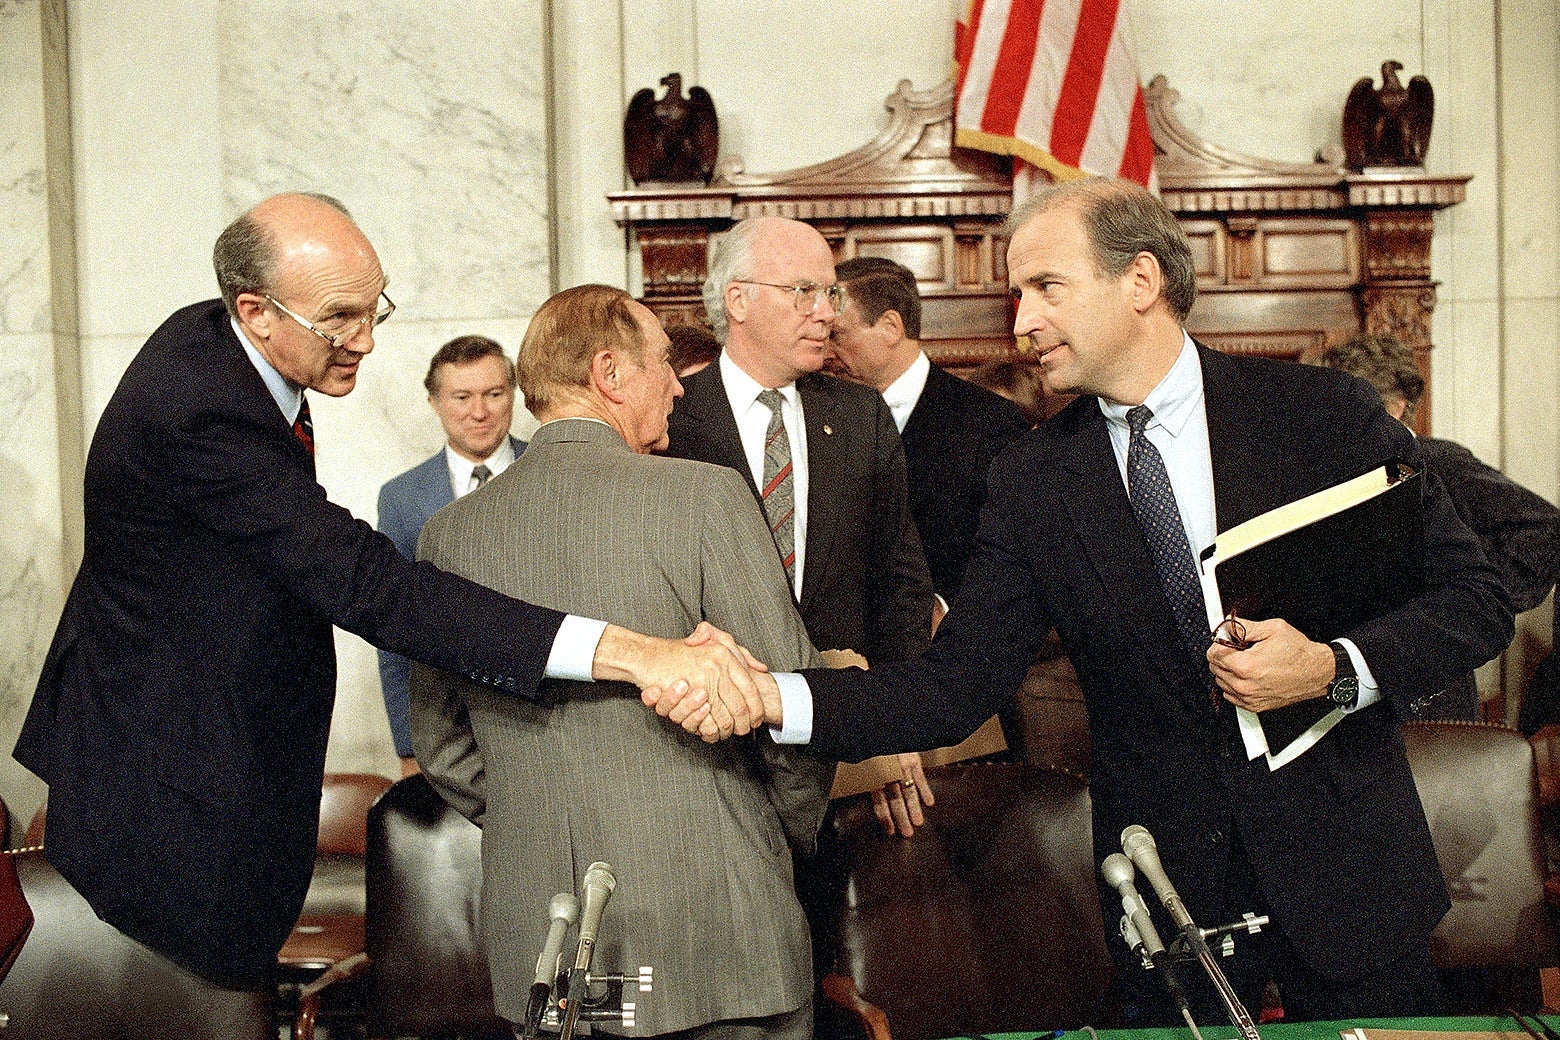 Biden shakes hands with Simpson in the committee room